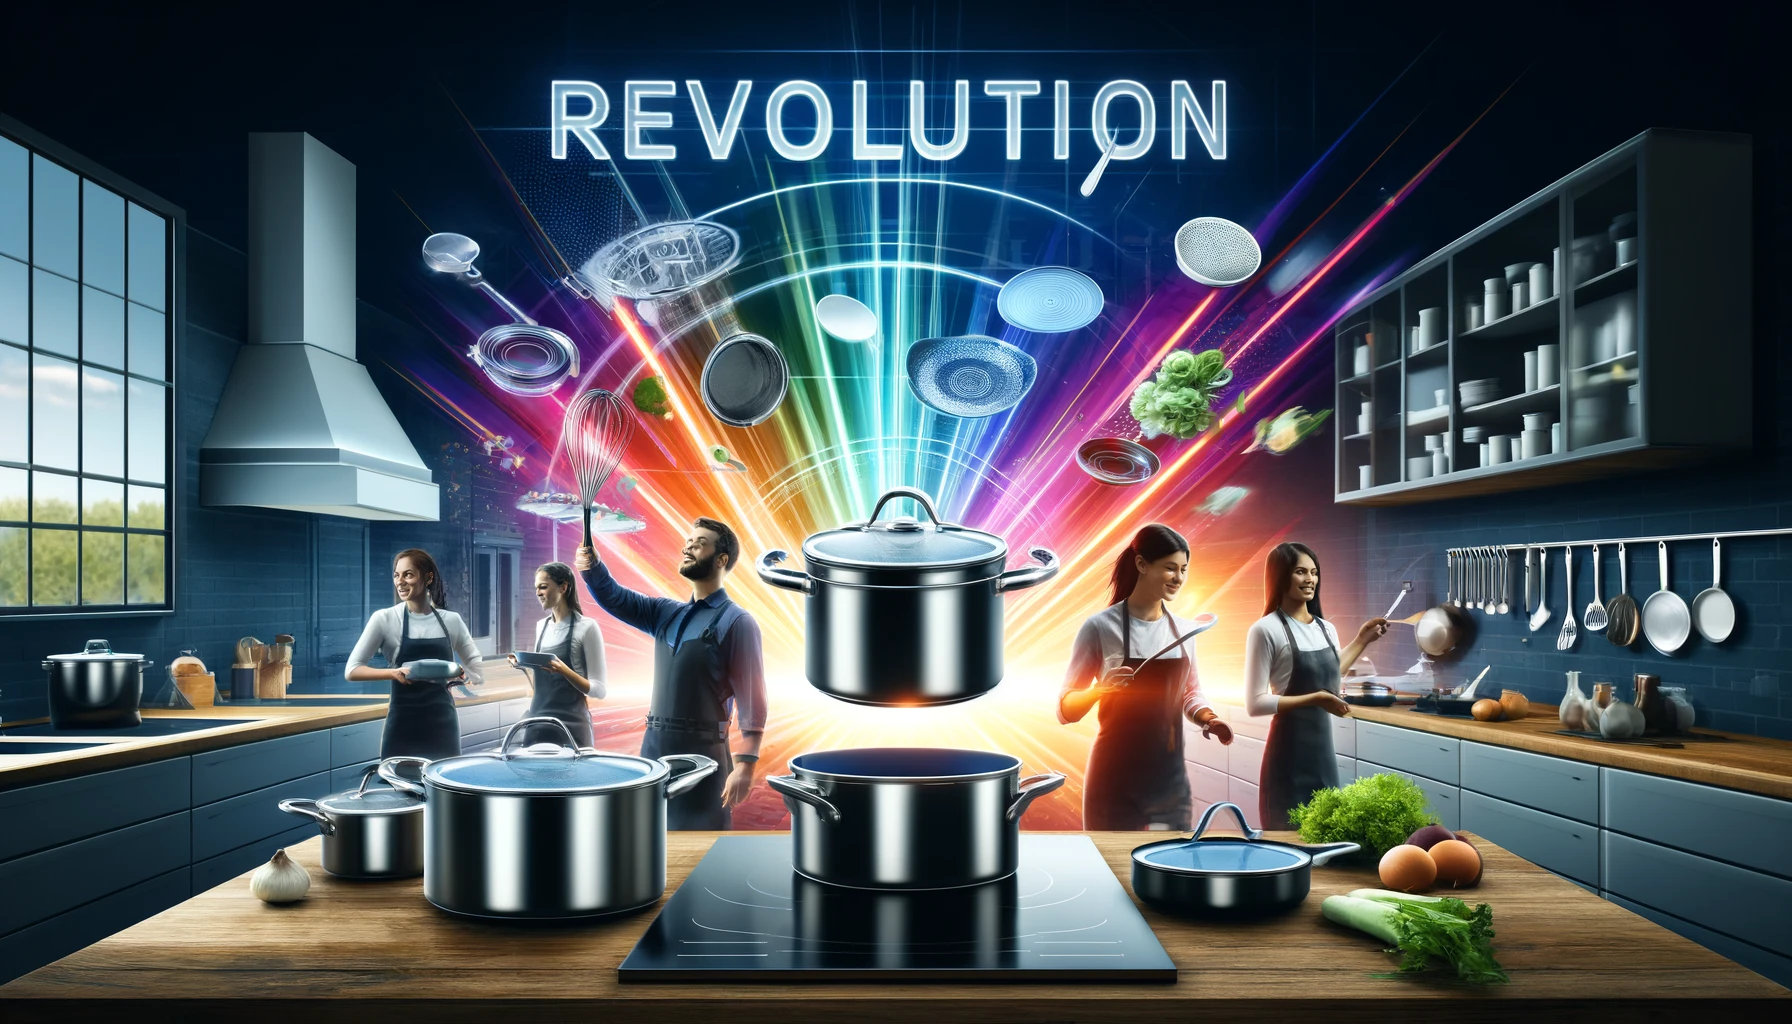 The Coating Revolution: How the World Is Swapping Pots and Pans